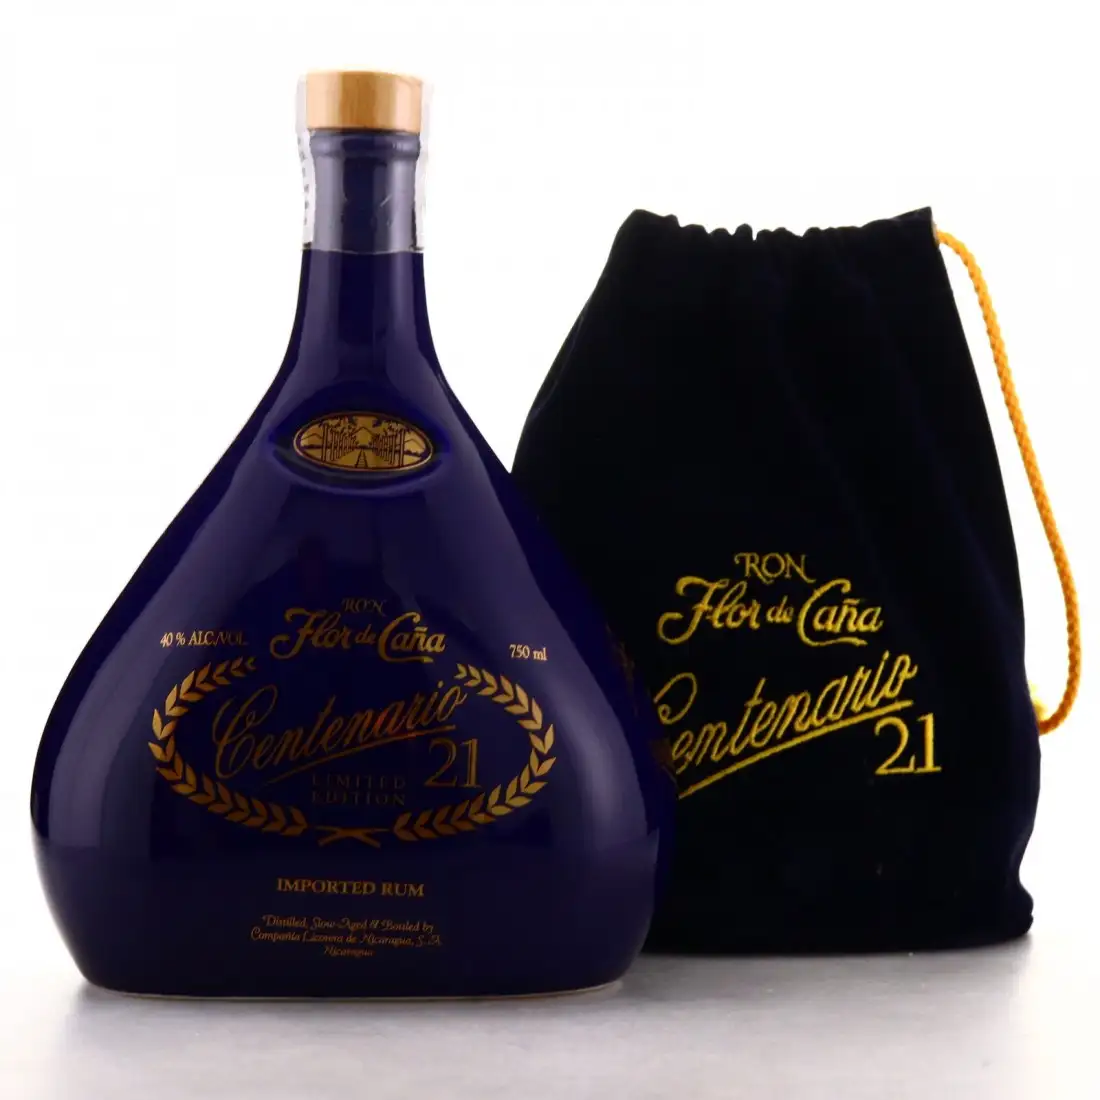 Image of the front of the bottle of the rum Flor de Caña Centenario 21 Limited Edition